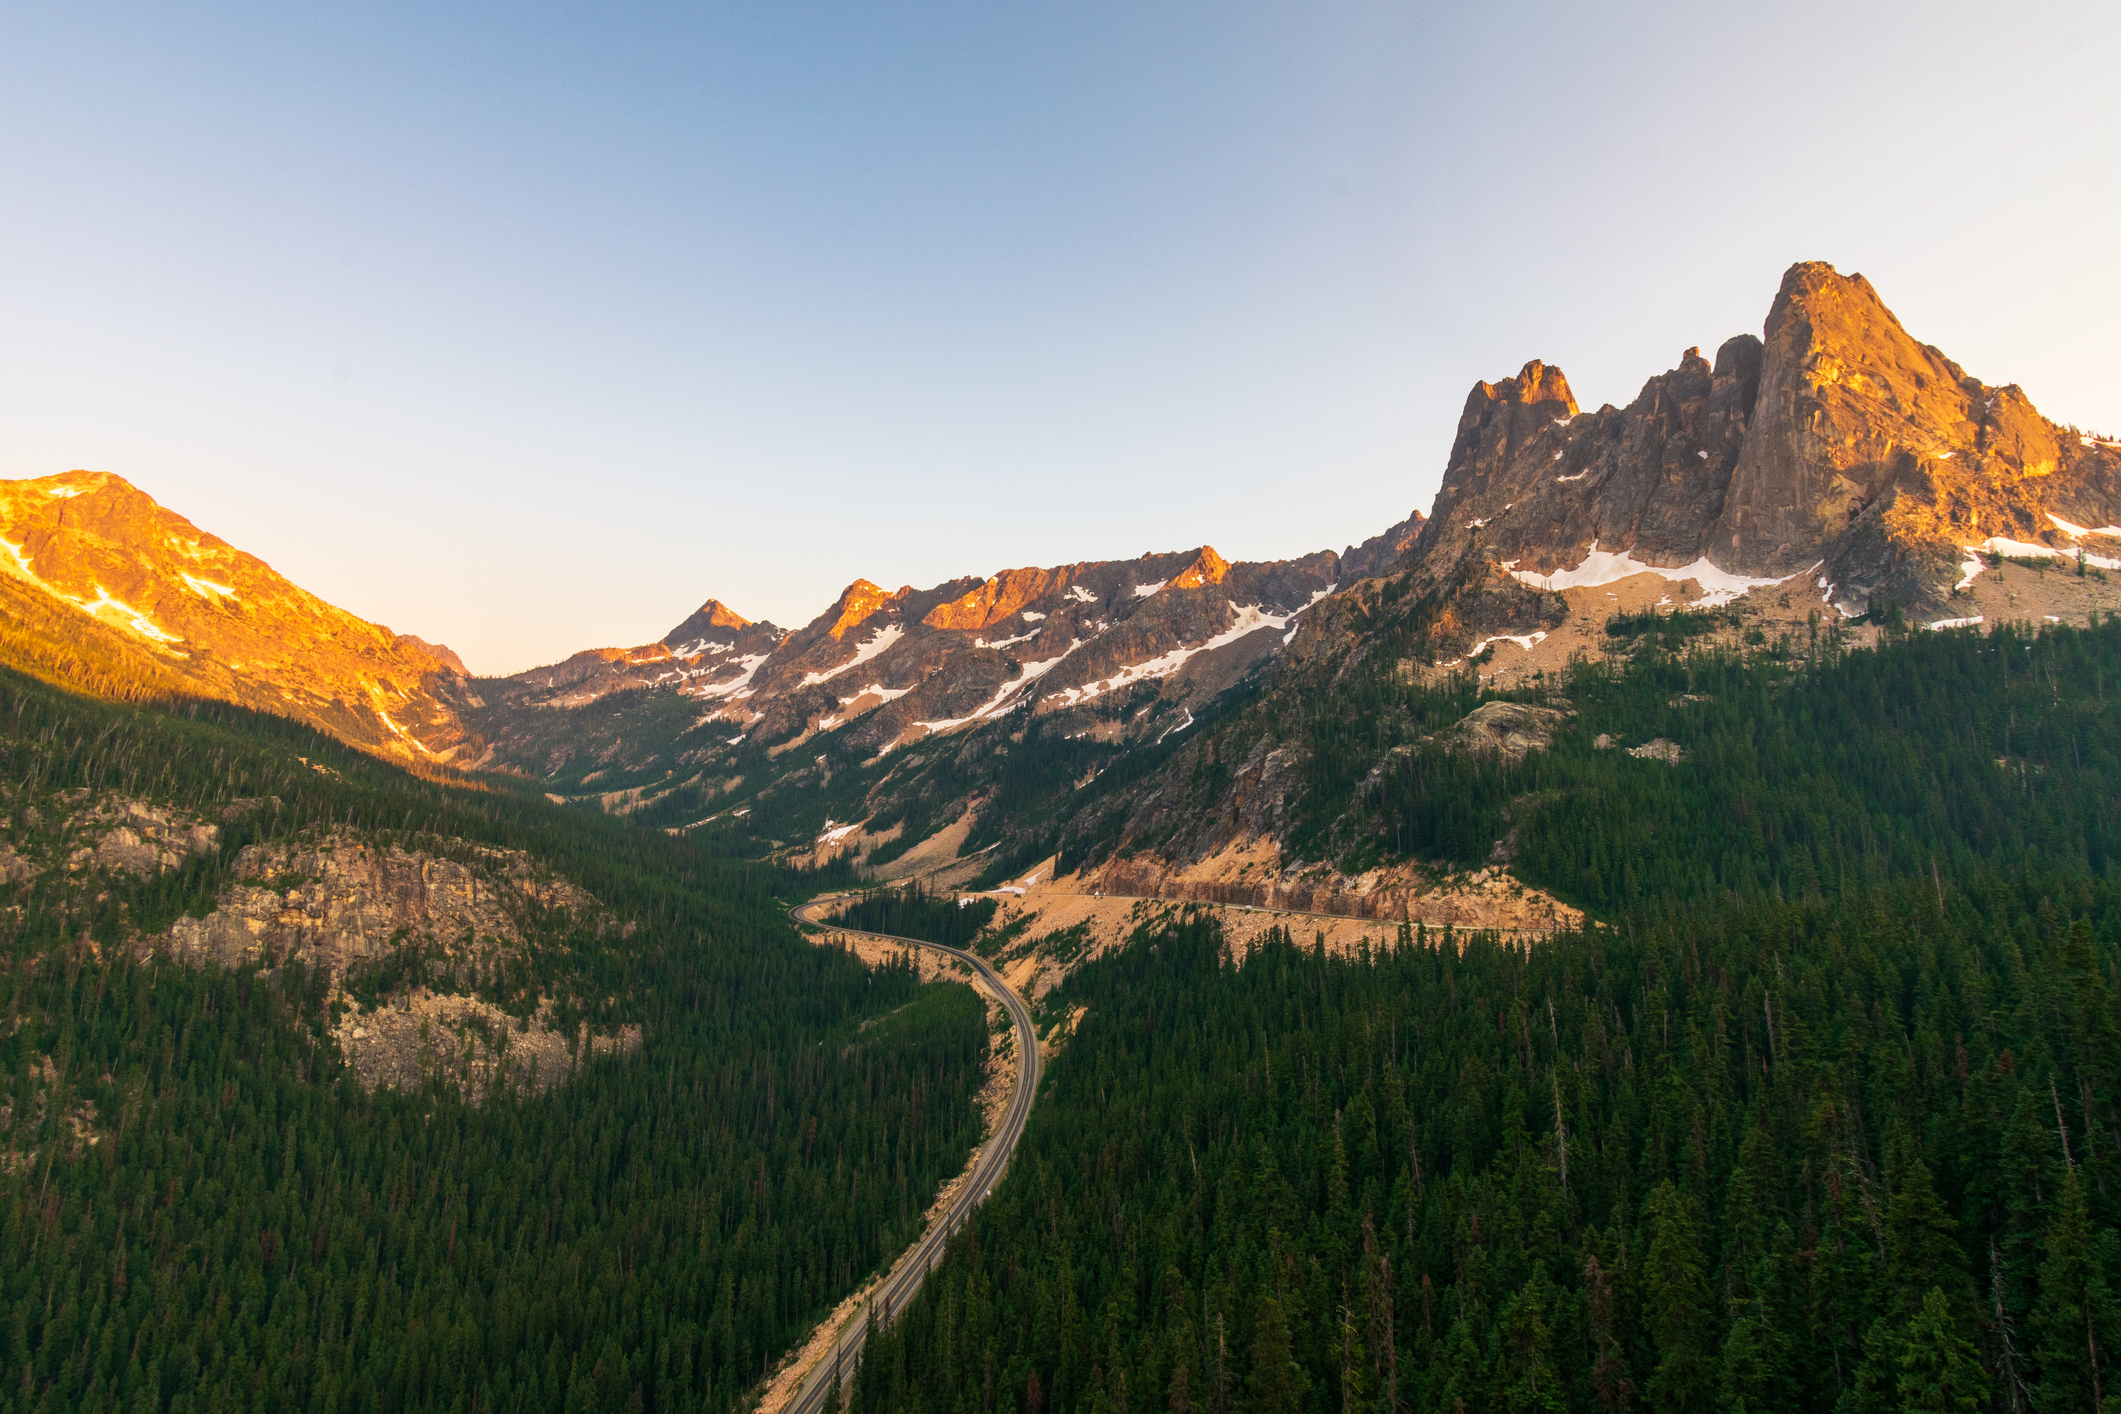 A road running through the Cascade Mountains in Washington State